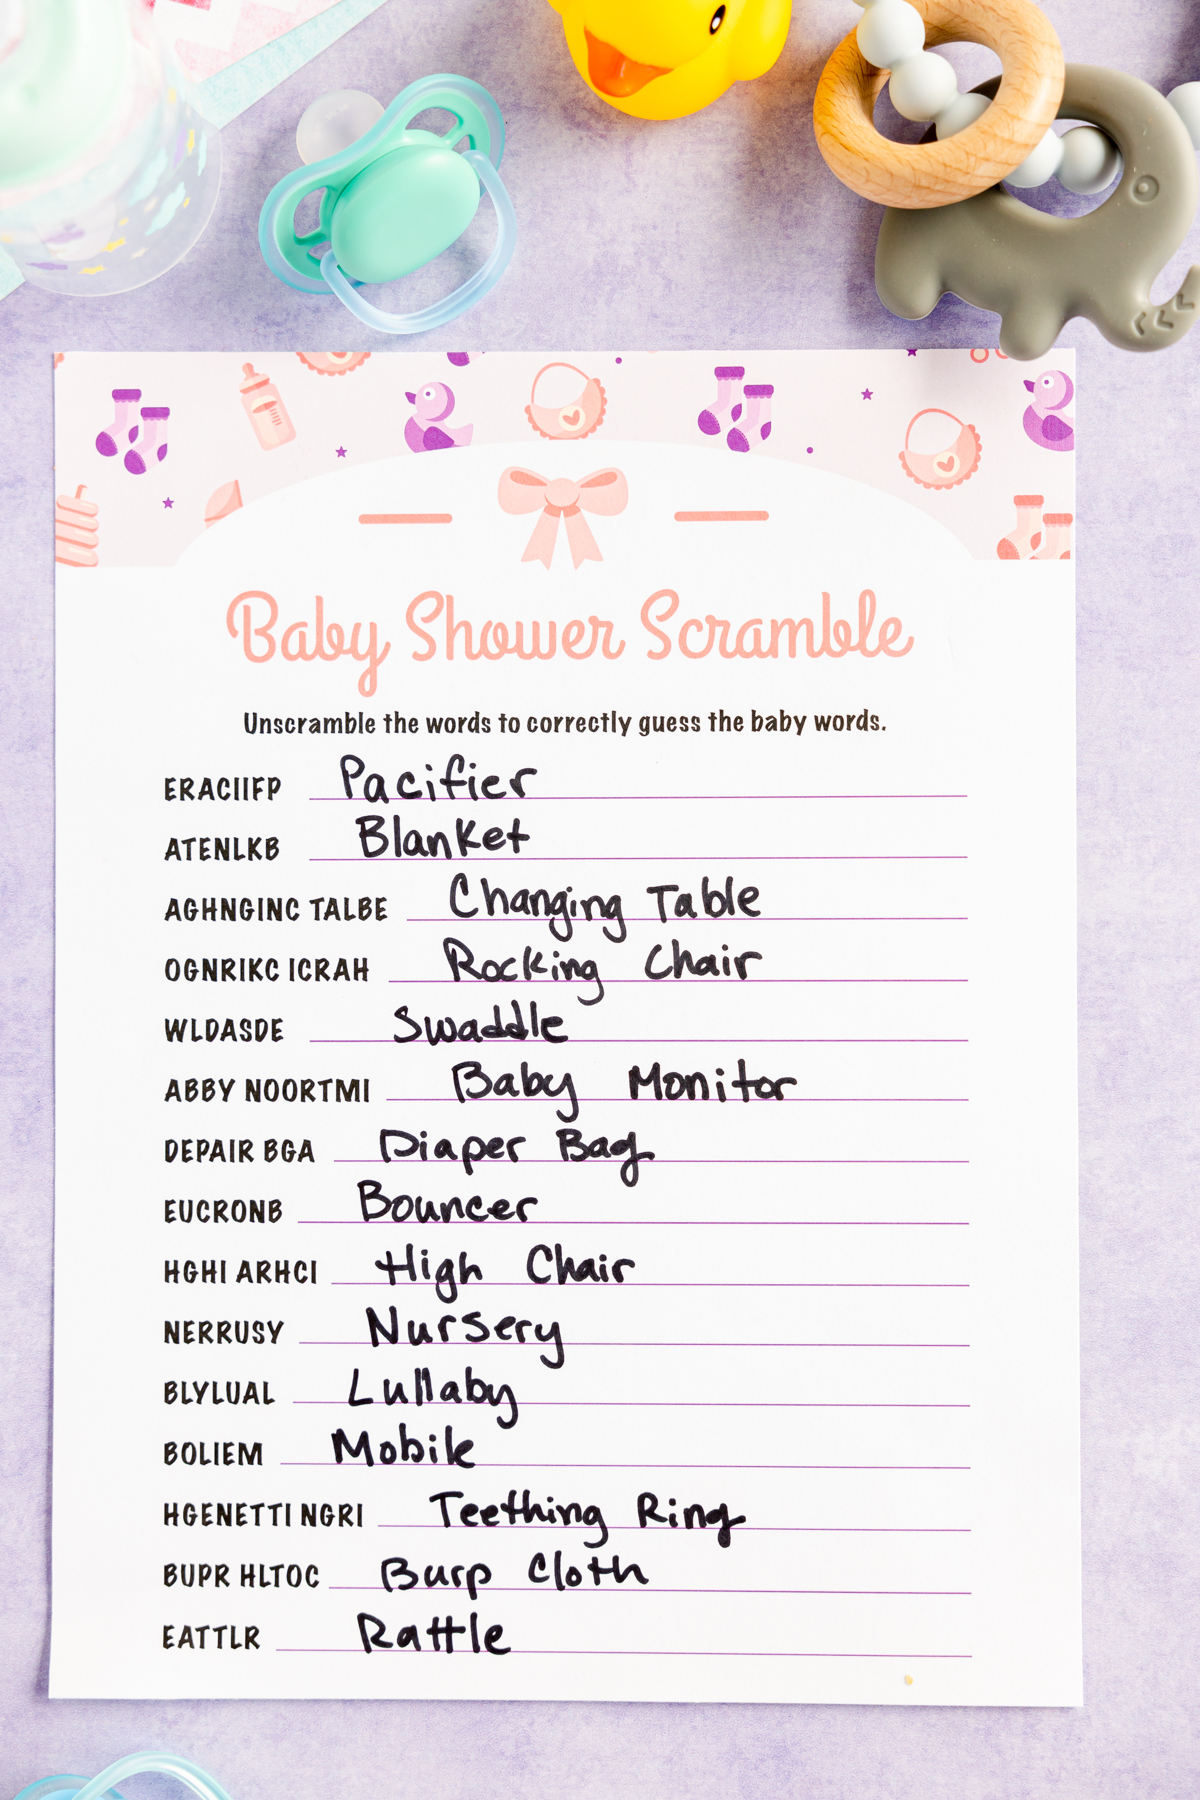 baby shower word scramble with answers written in